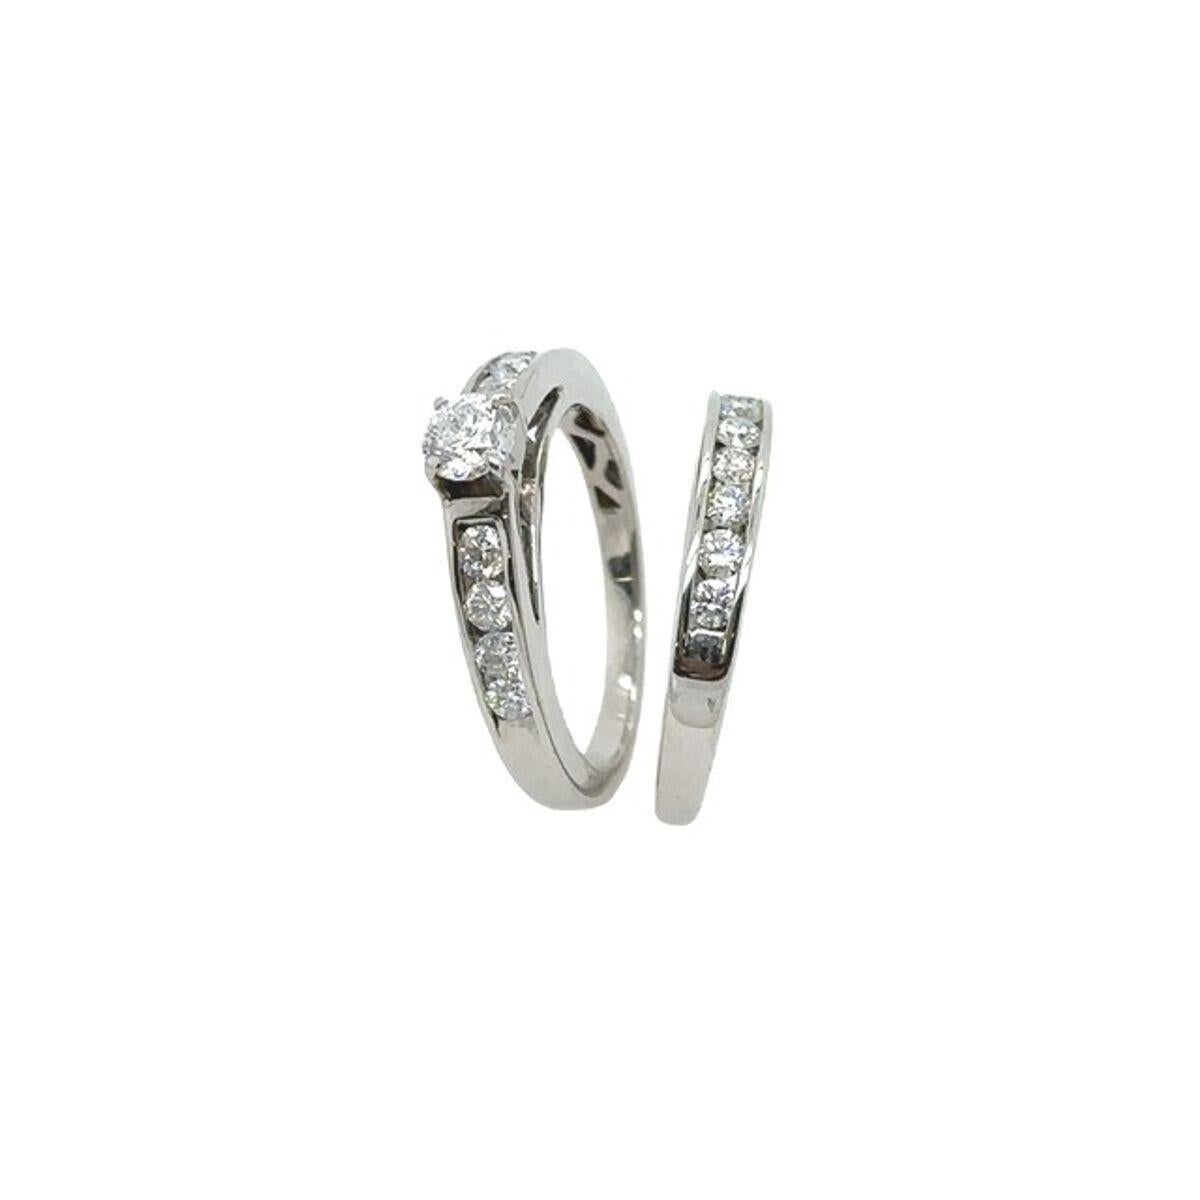 Bridal Set In 18ct White Gold , Engagement Ring0.65ct + 0.35ct Wedding Ring

Additional Information:
Total Diamond Weight : 0.65ct+0.35ct 
 Diamond Colour: H
 Diamond Clarity: SI
Total  Weight: 5.5g
Ring Size: K1/2
Width of Band: 1.72mm/1.85mm
Width